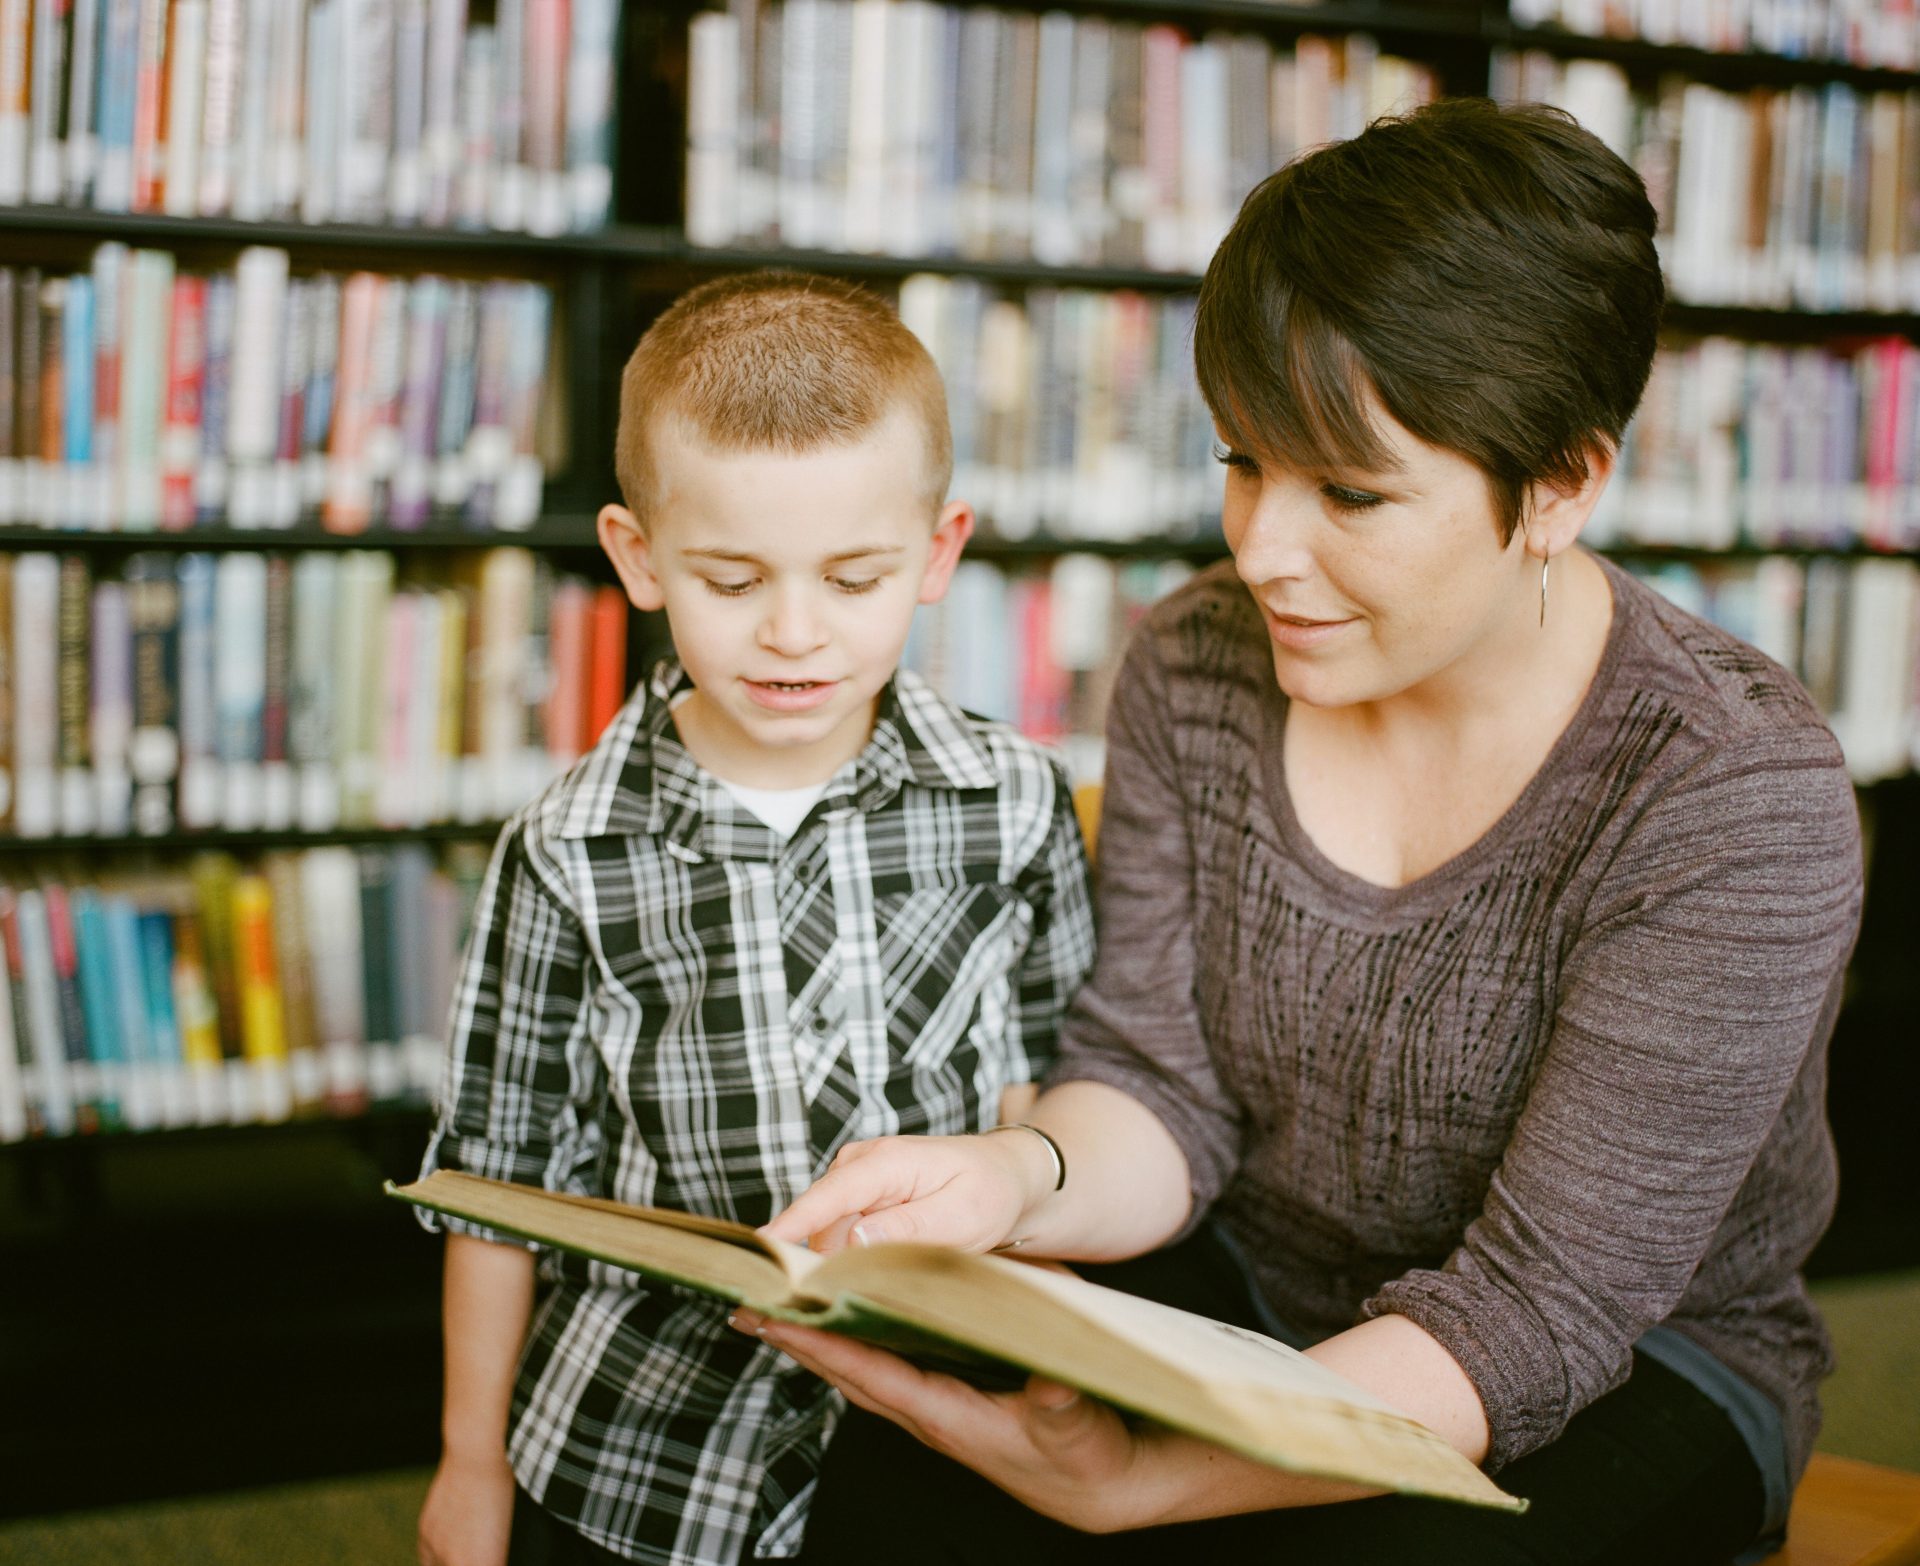 Woman reading aloud with little boy in a library